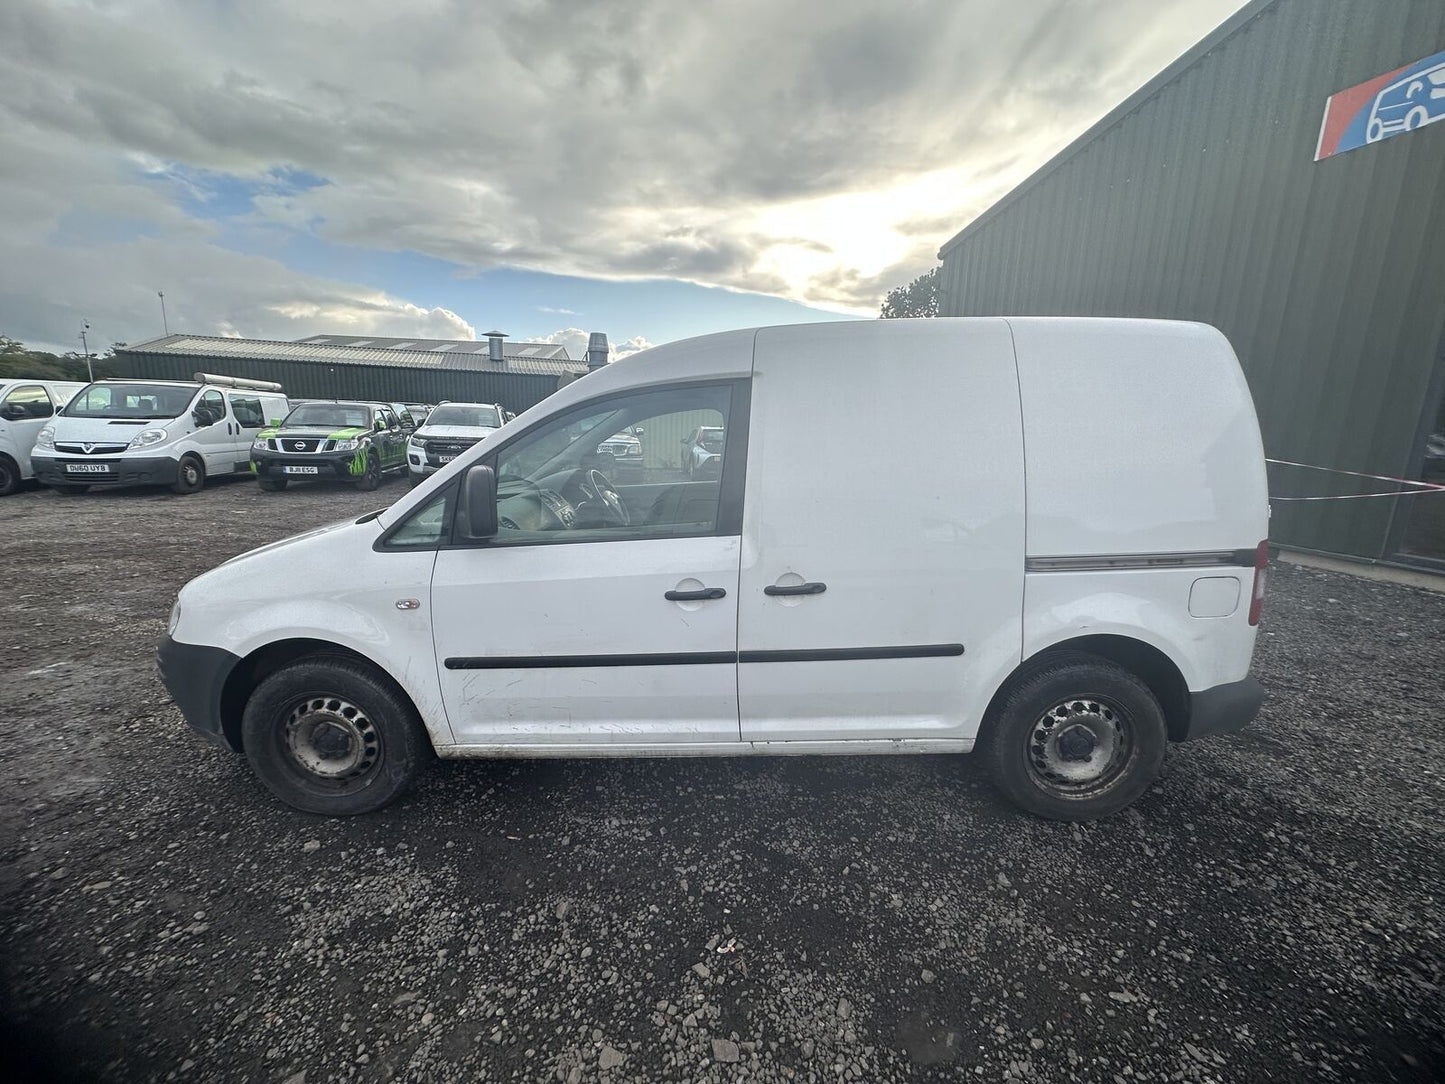 Bid on 2010 VOLKSWAGEN CADDY C20: RELIABLE WHITE PANEL VAN - NO VAT ON THE HAMMER- Buy &amp; Sell on Auction with EAMA Group